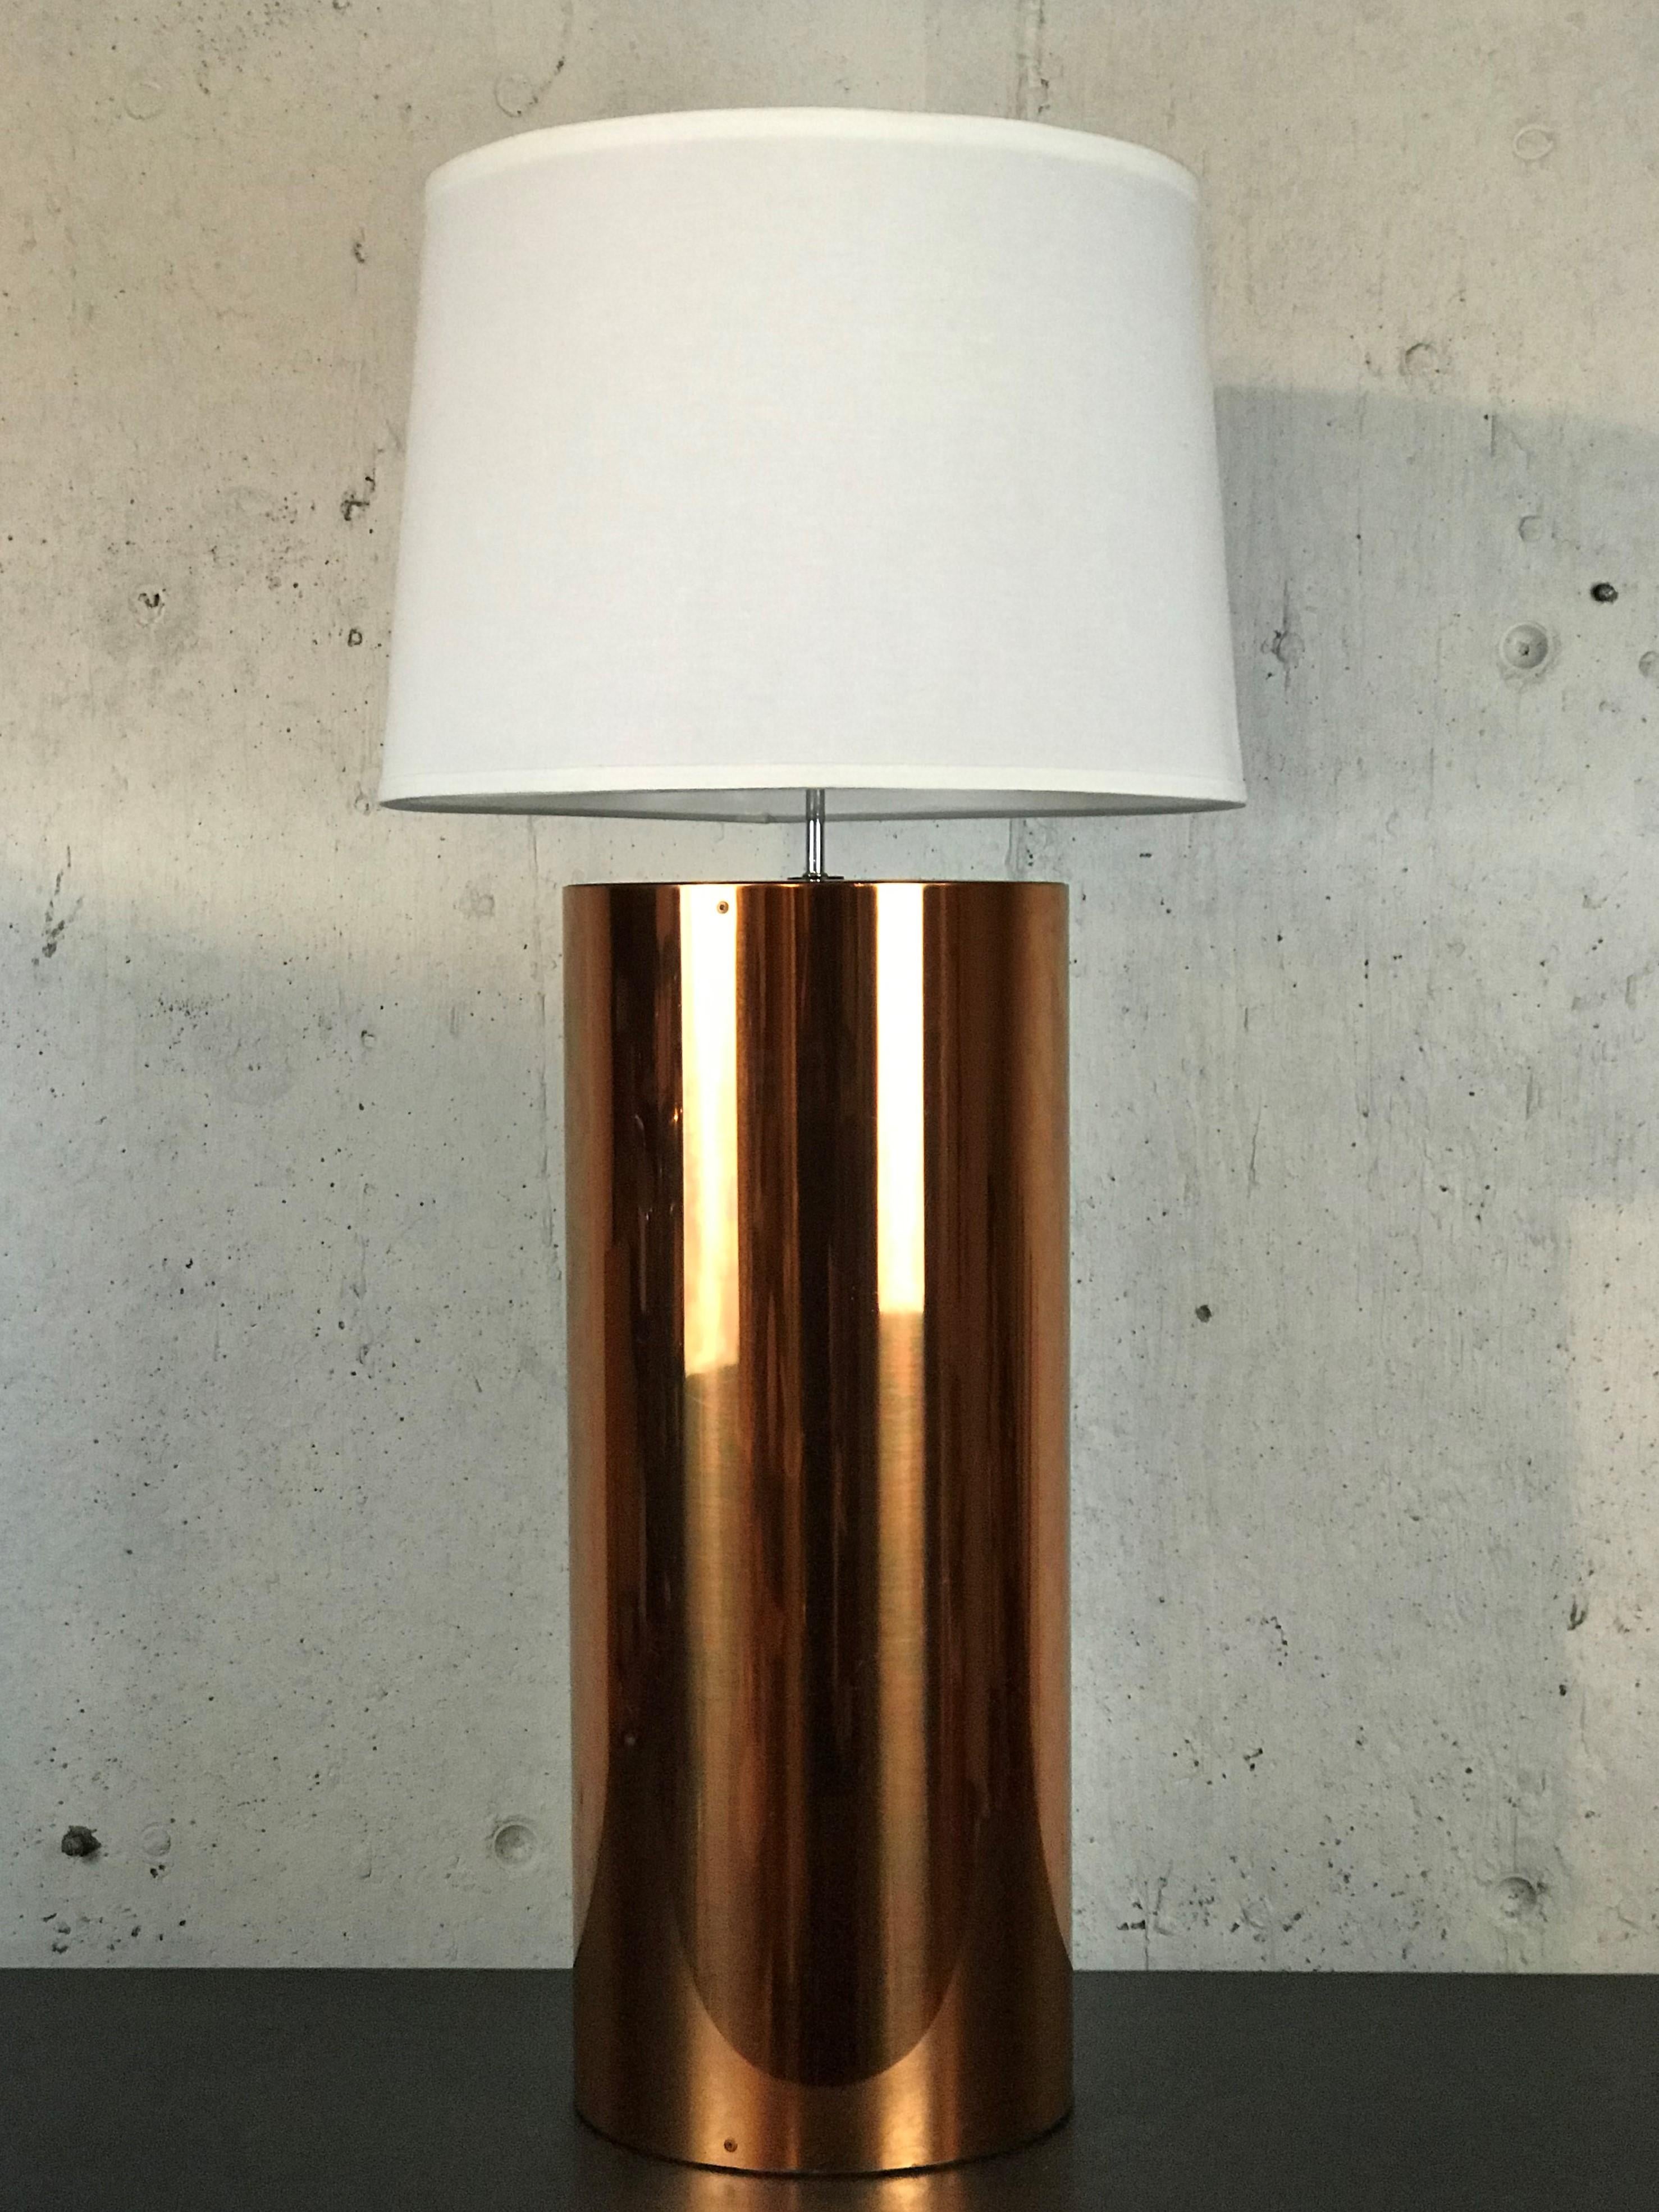 Plated Extra Large Mid Century Table Lamp Copper Cylinder Drum Form by George Kovacs